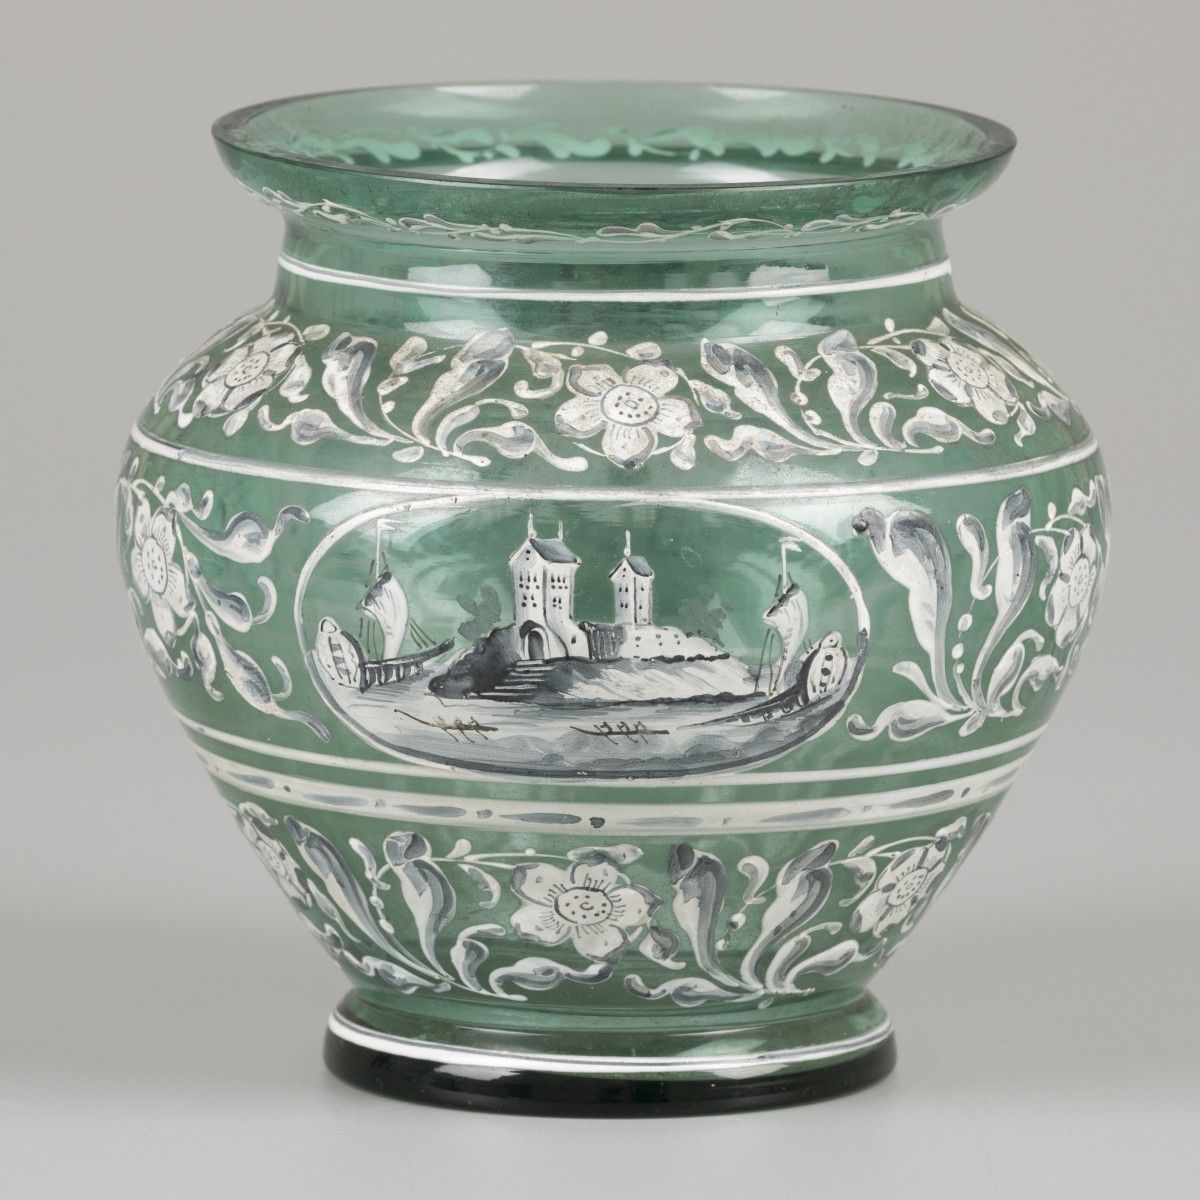 A glass vase with enamelled motif, Italy, 19th century. Handpainted with various&hellip;